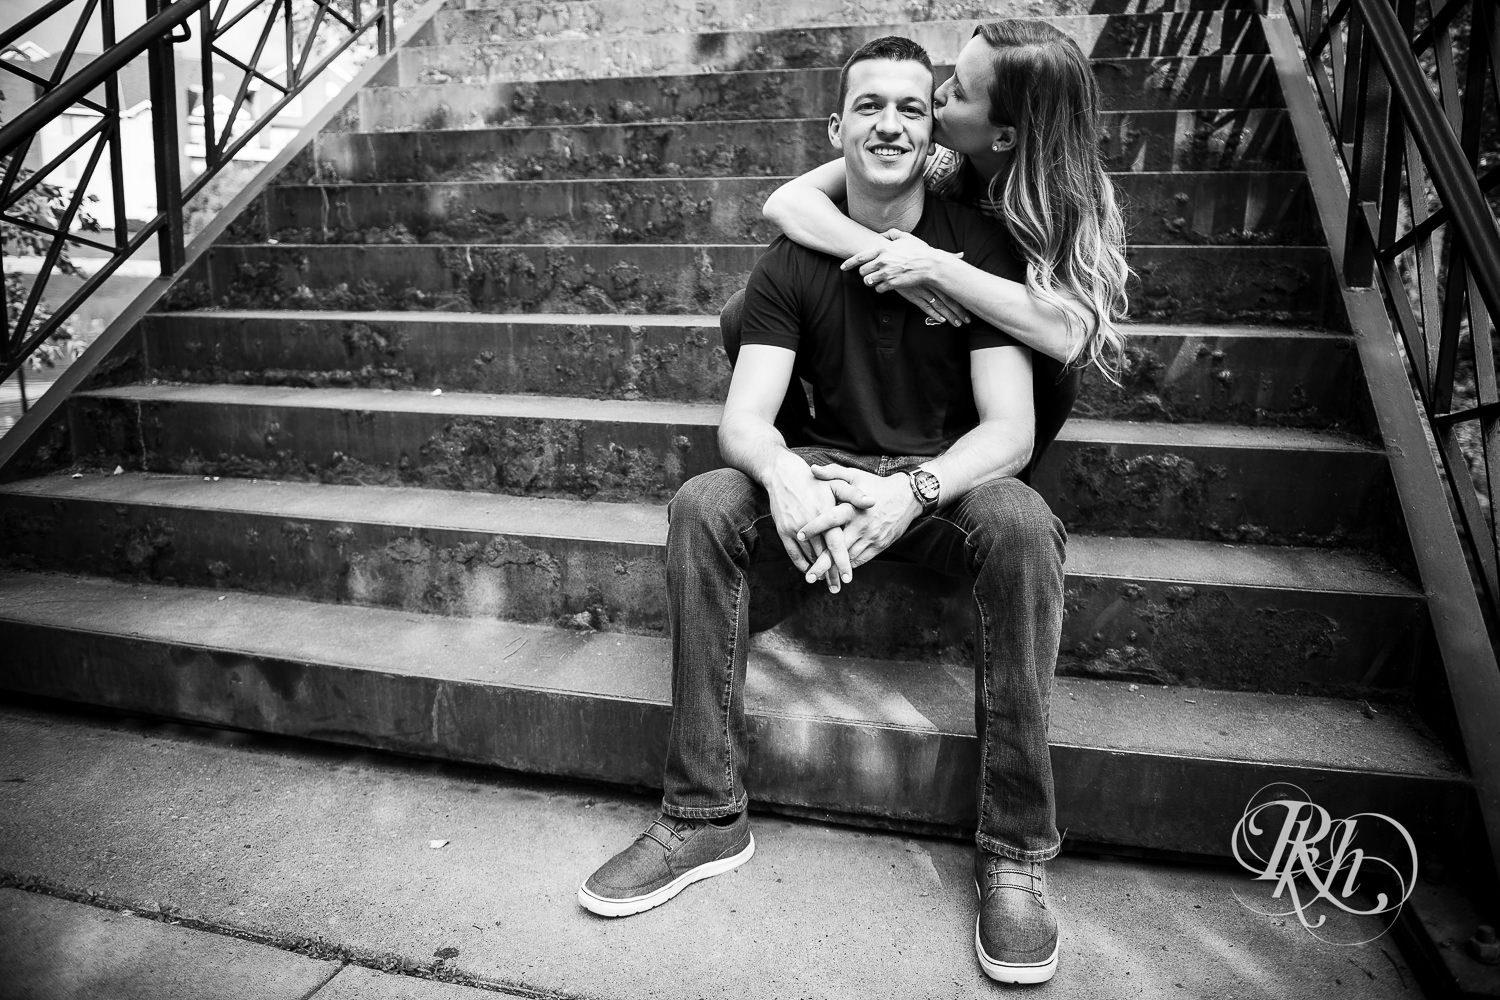 Man and woman in T-shirts and jeans kiss on stairs in Centennial Lakes Park in Edina, Minnesota.